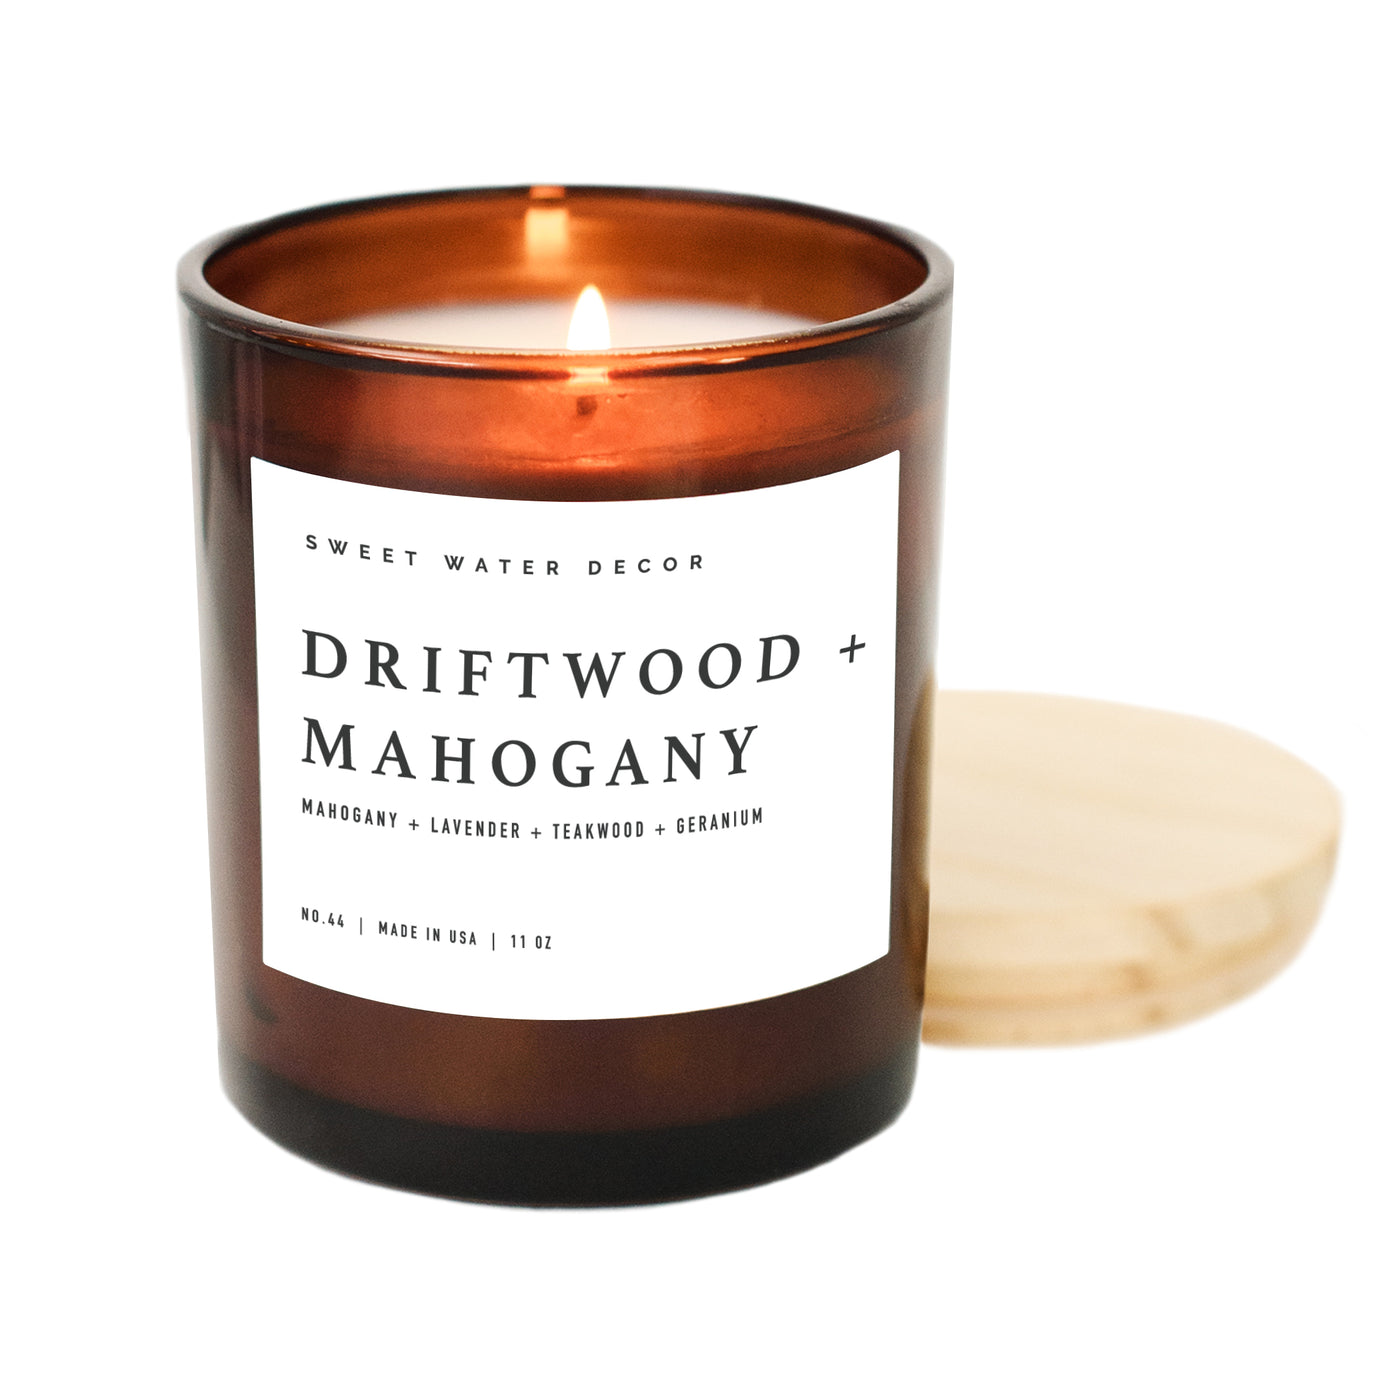 Driftwood and Mahogany Soy Candle - Amber Jar - 11 oz - Sweet Water Decor - Candles